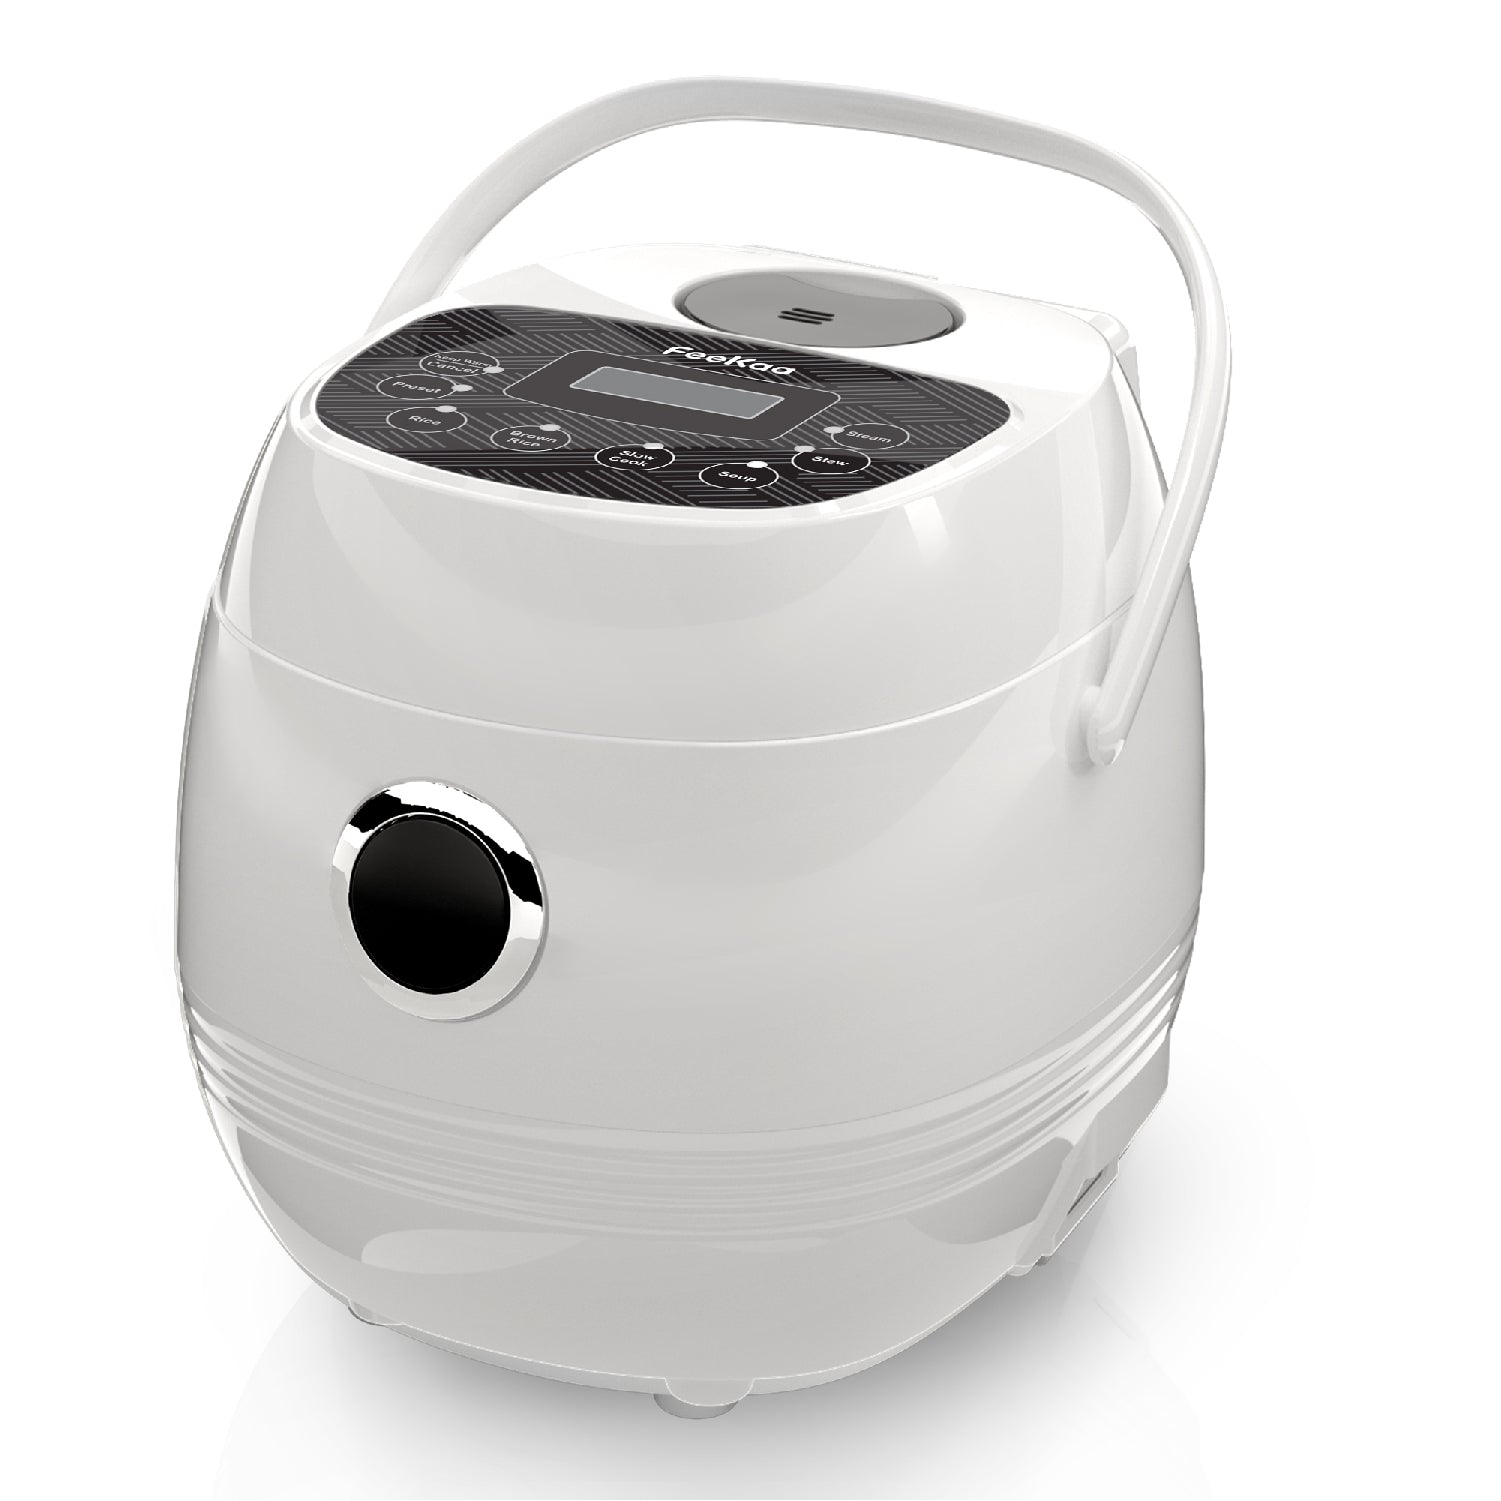 Bear Electric Rice Cooker Mini Smart Electric Cooker Home 1.6L  Multifunction Reservation Kitchen Appliance For Dormitory